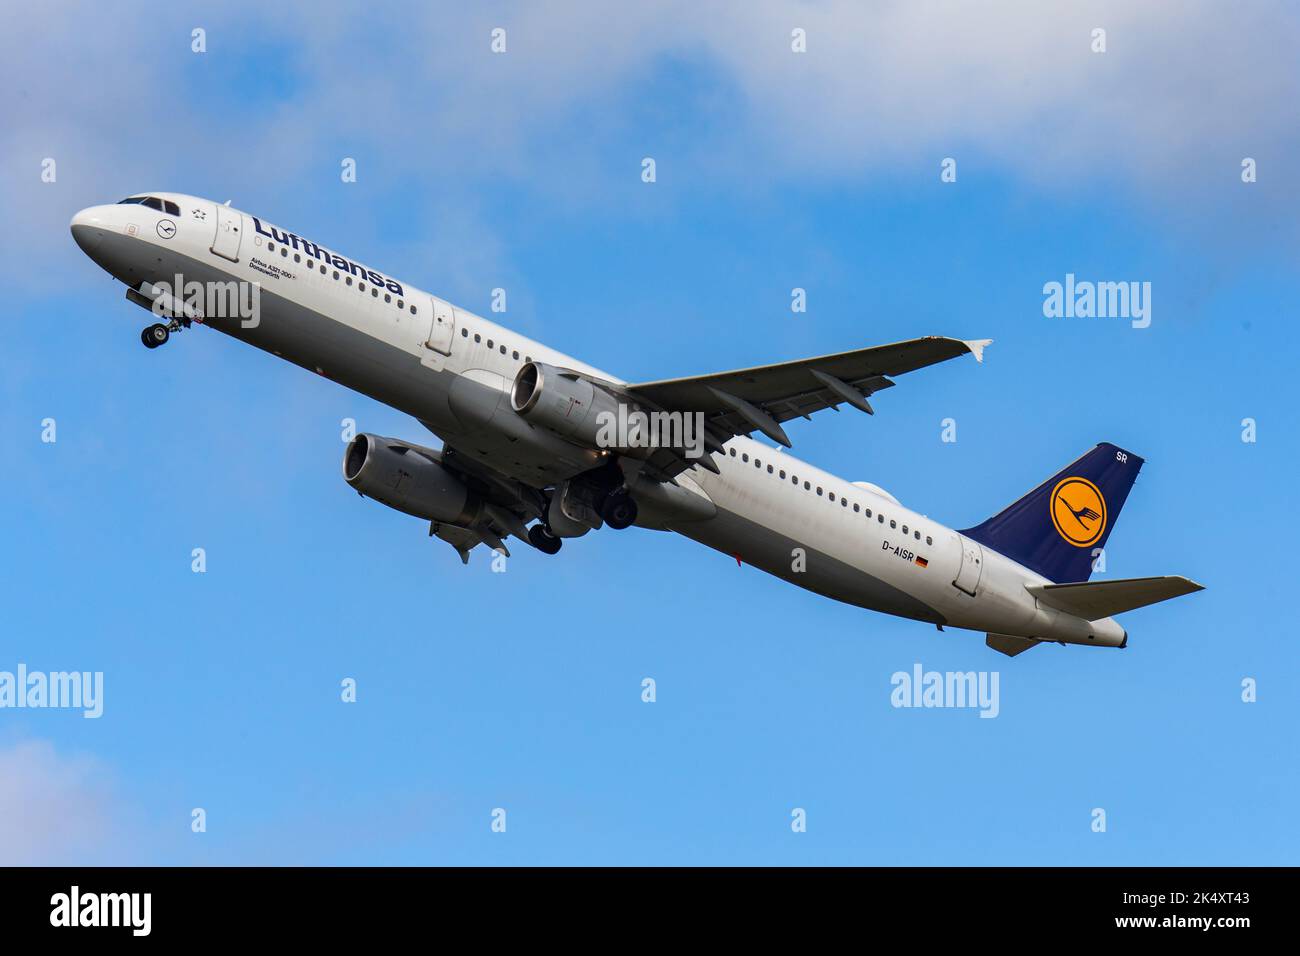 SCOTLAND - A beautiful view of a plane  Lufthansa Airbus A321-200, sorrowing through the bright blue sky Stock Photo